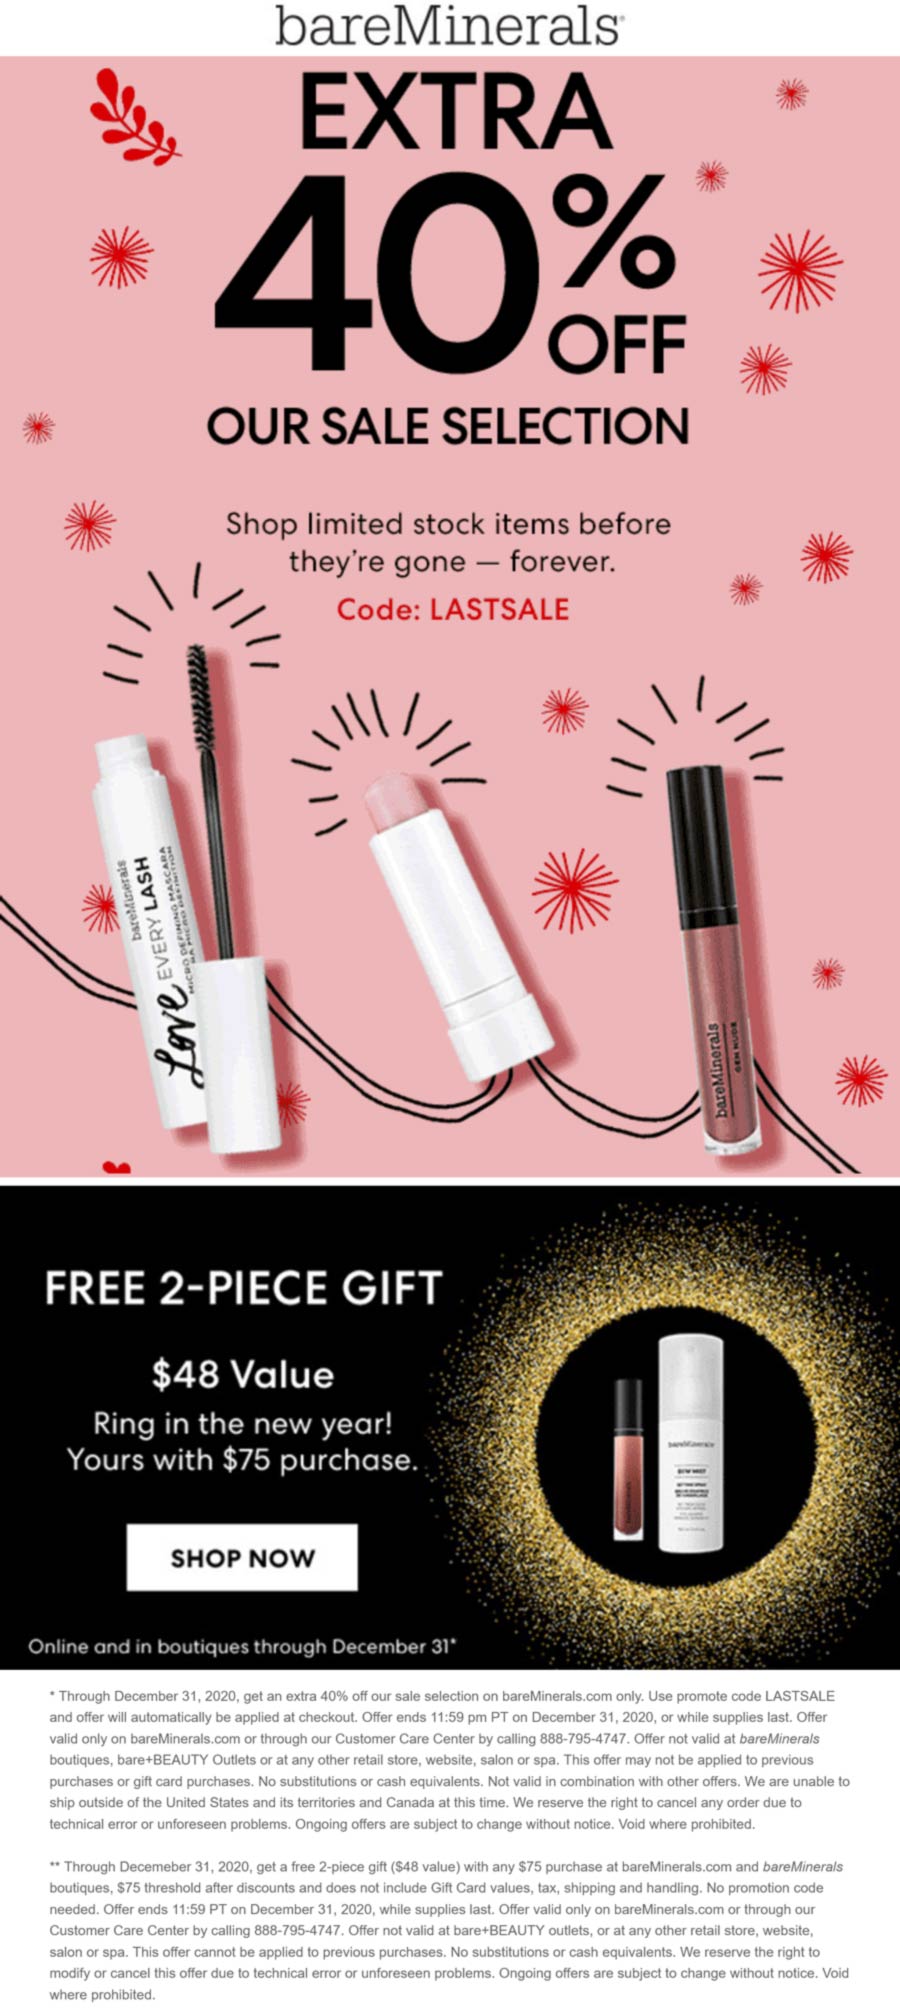 bareMinerals stores Coupon  Extra 40% off sale items today at bareMinerals via promo code LASTSALE #bareminerals 